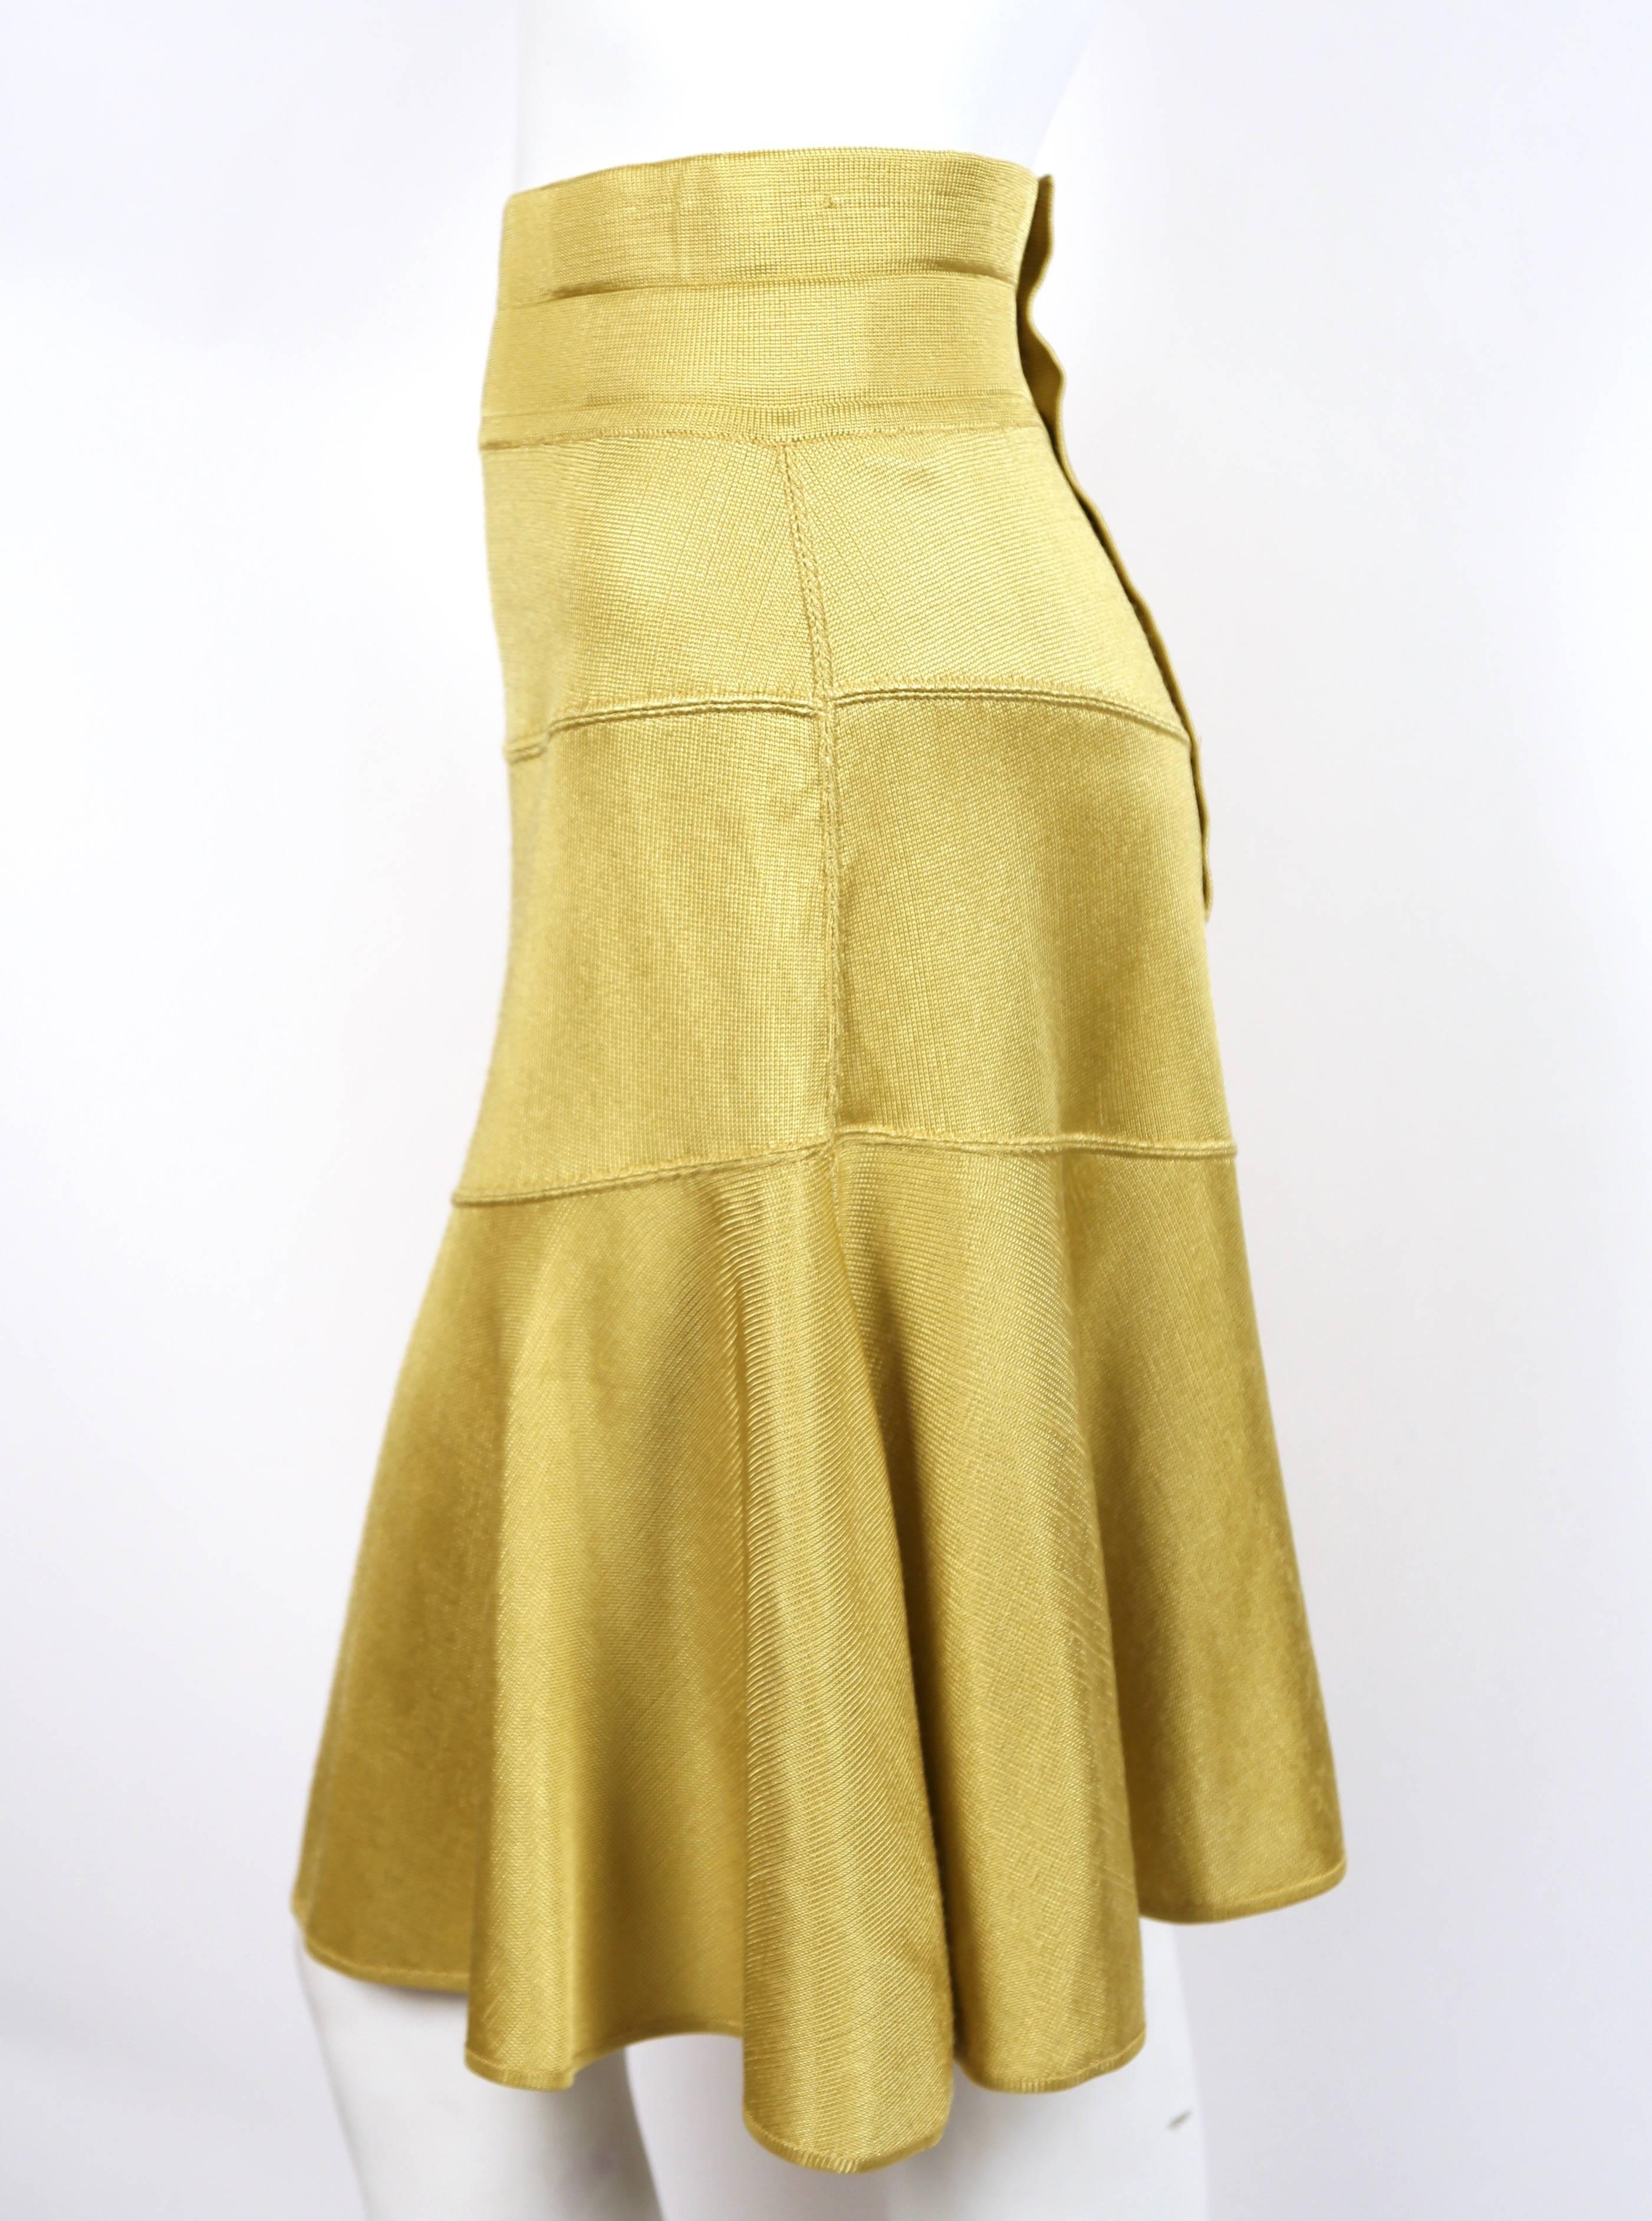 Yellow seamed skirt with high waist and center slits at front and back from Azzedine Alaia dating to the 1980's. Size 'S'. Approximate measurements: waist 25